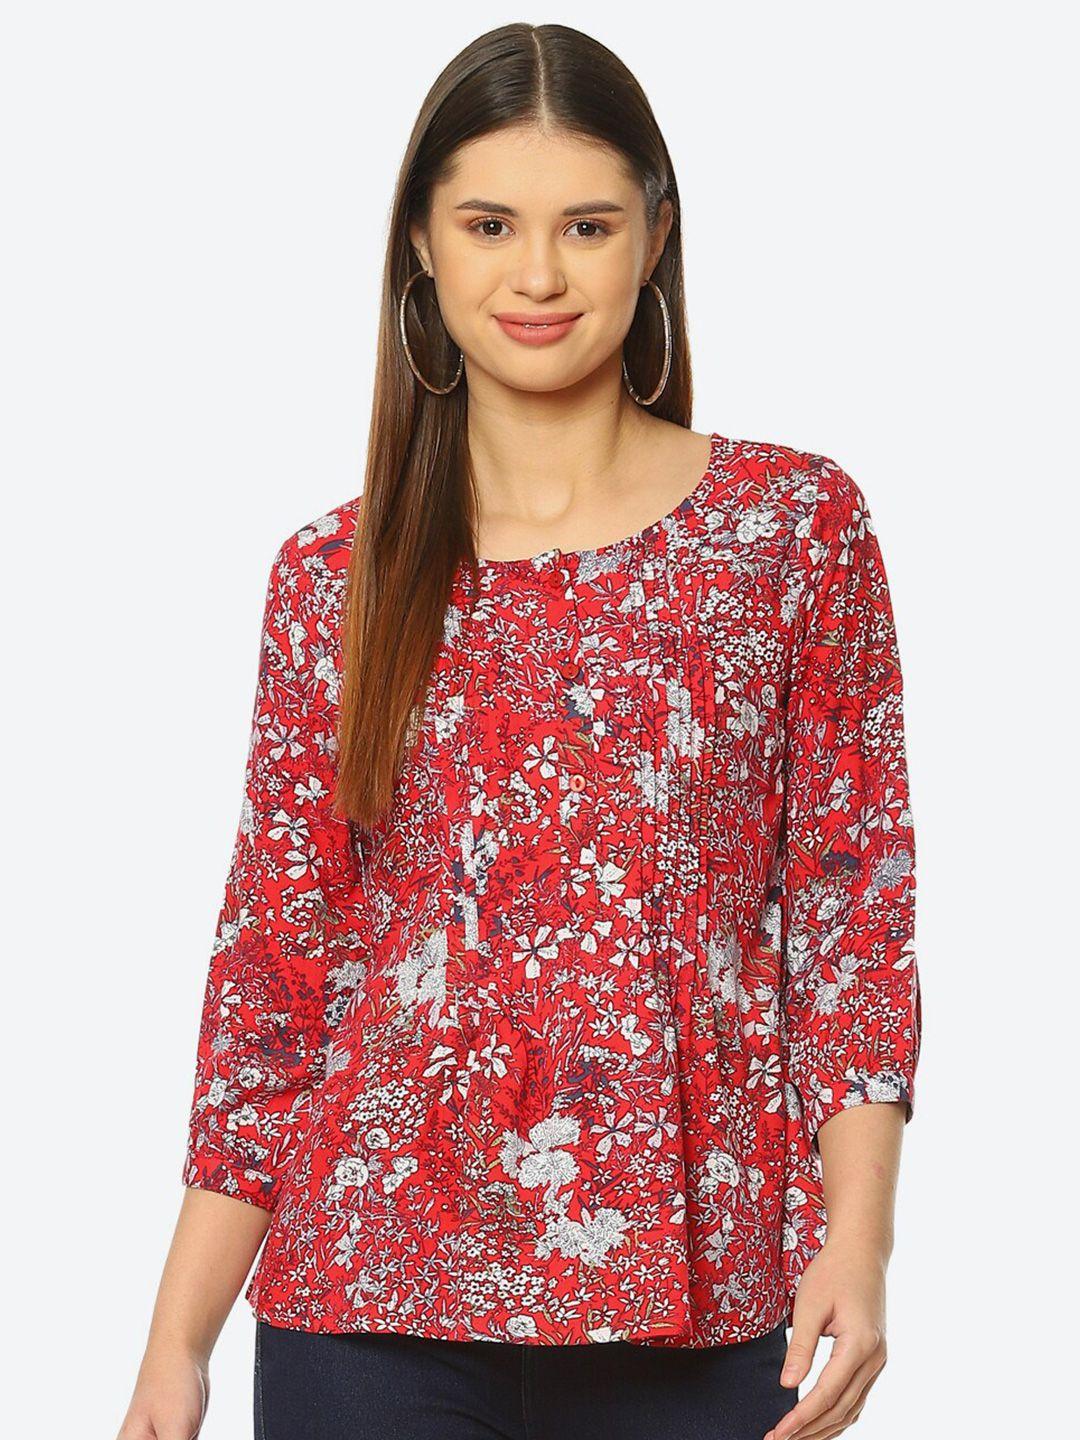 2bme red floral print top